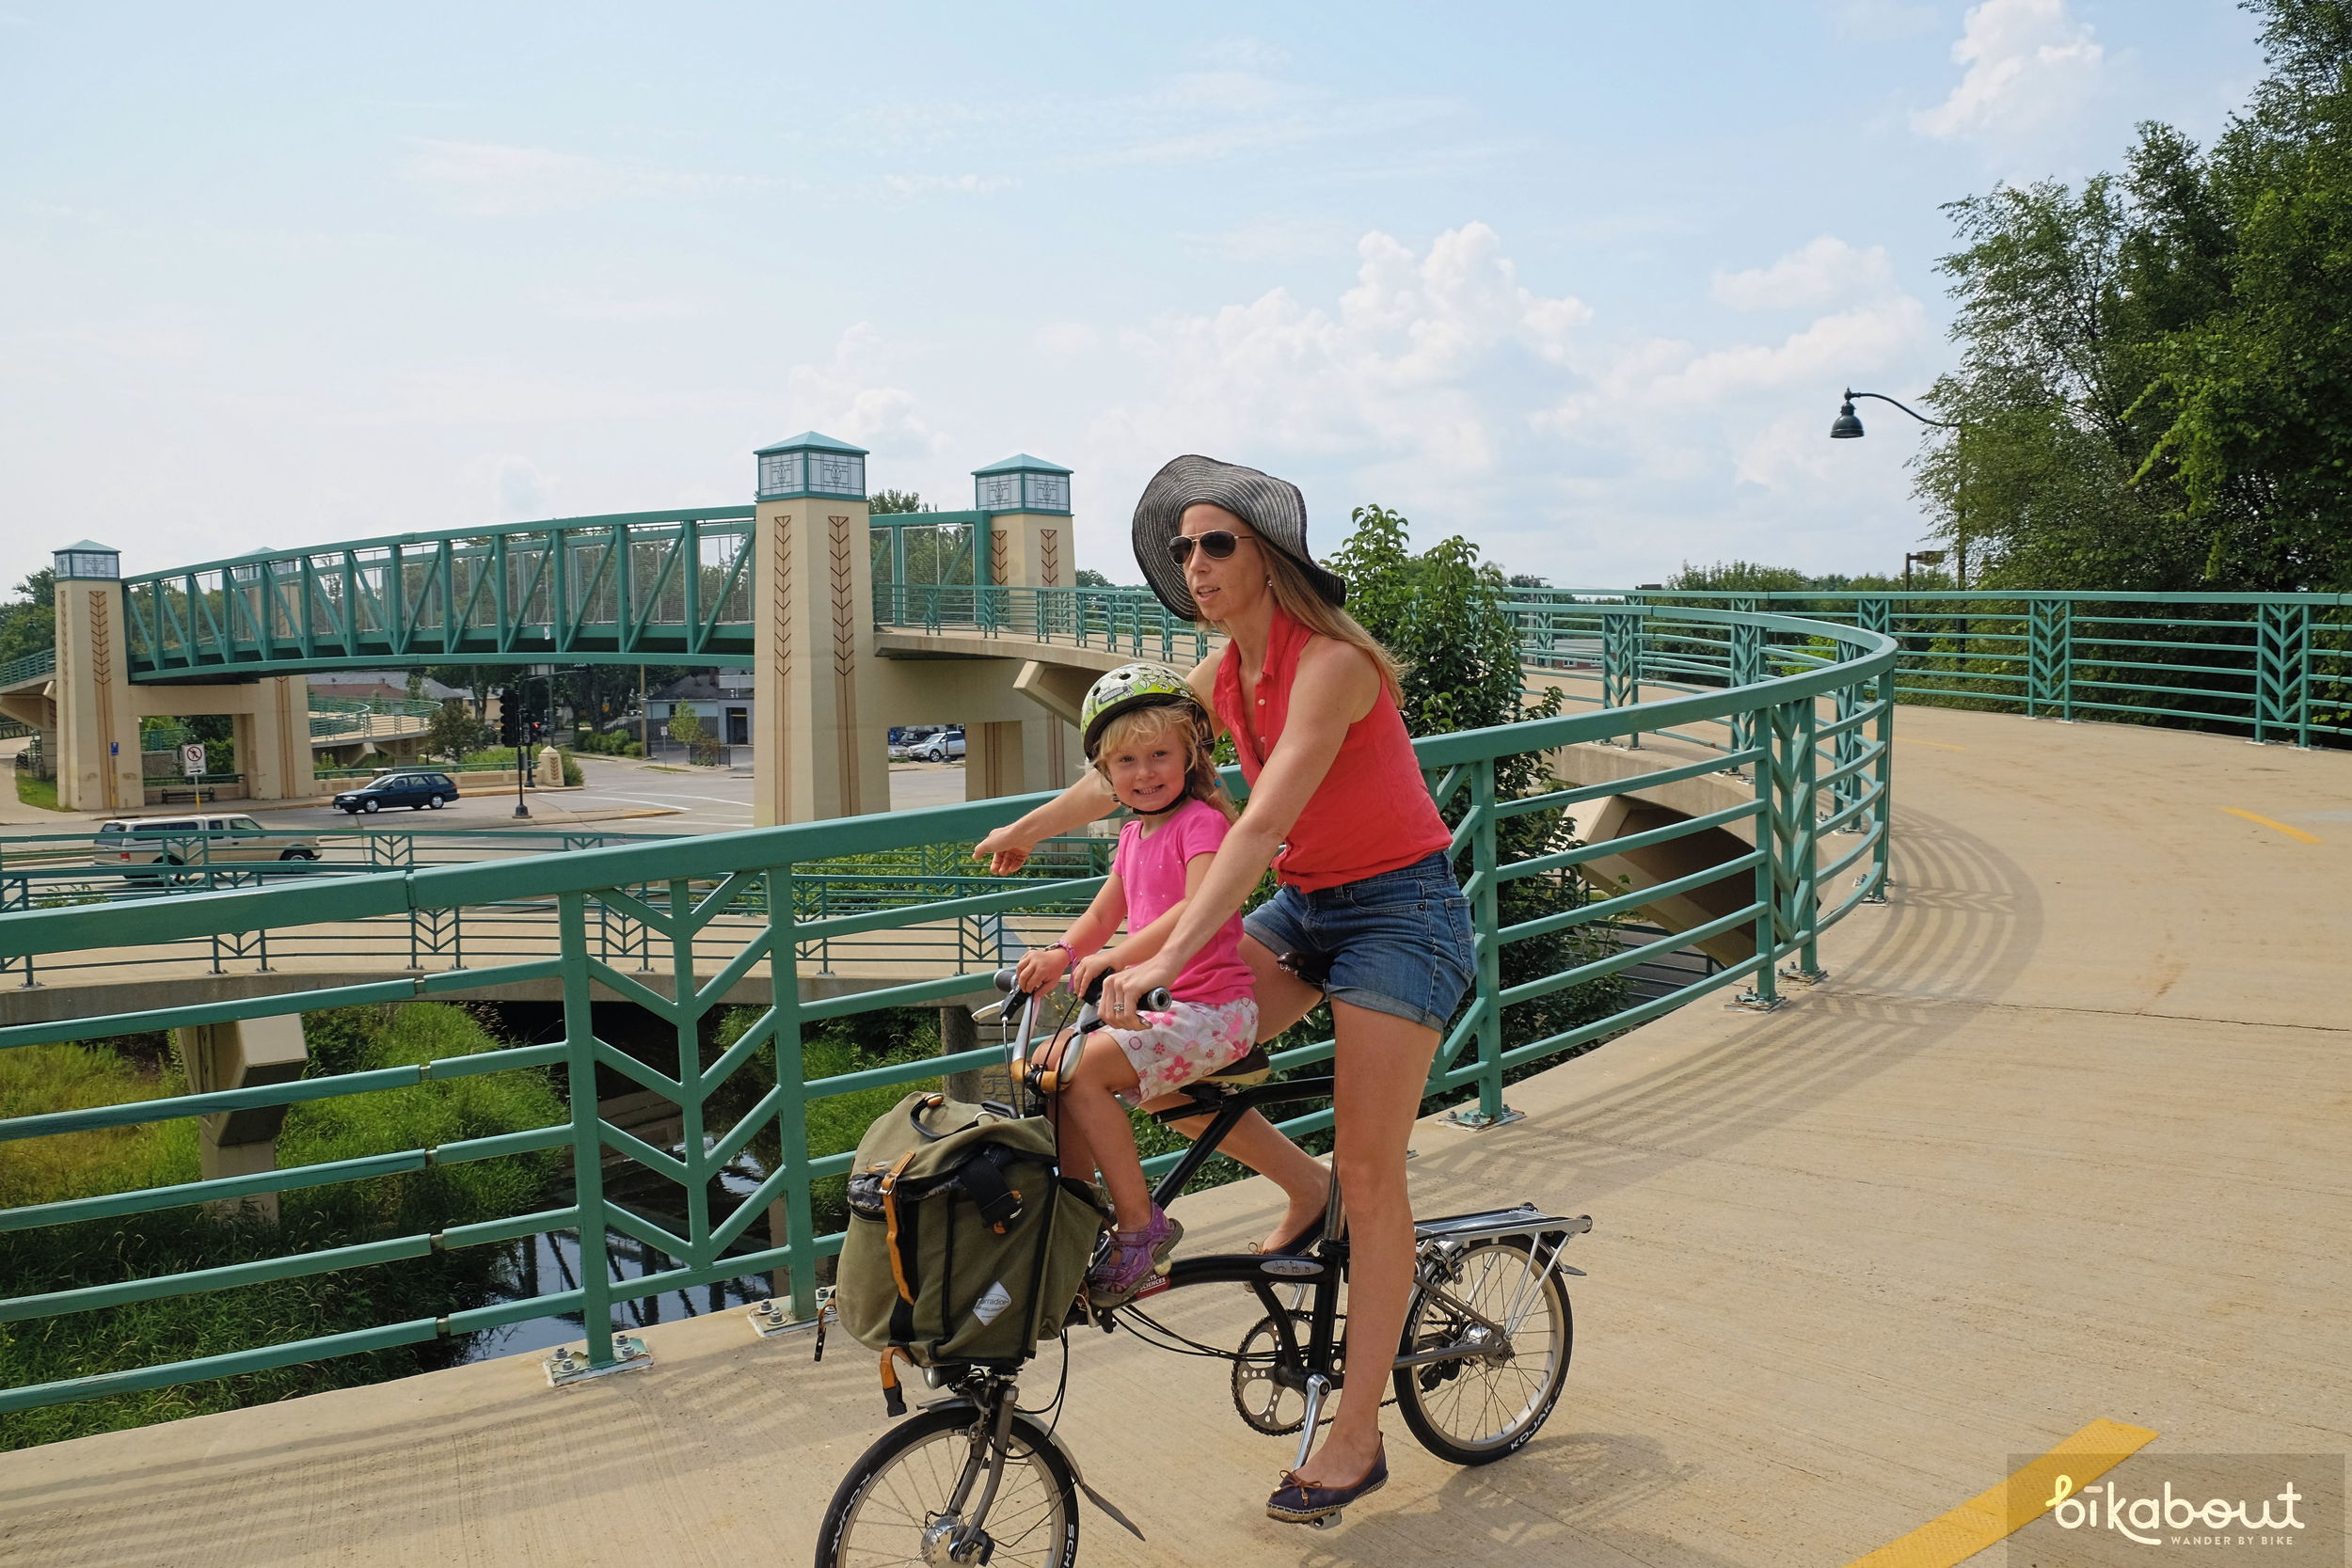 Bike bridges connect trails like the Stark River over busy streets and highways in Madison.